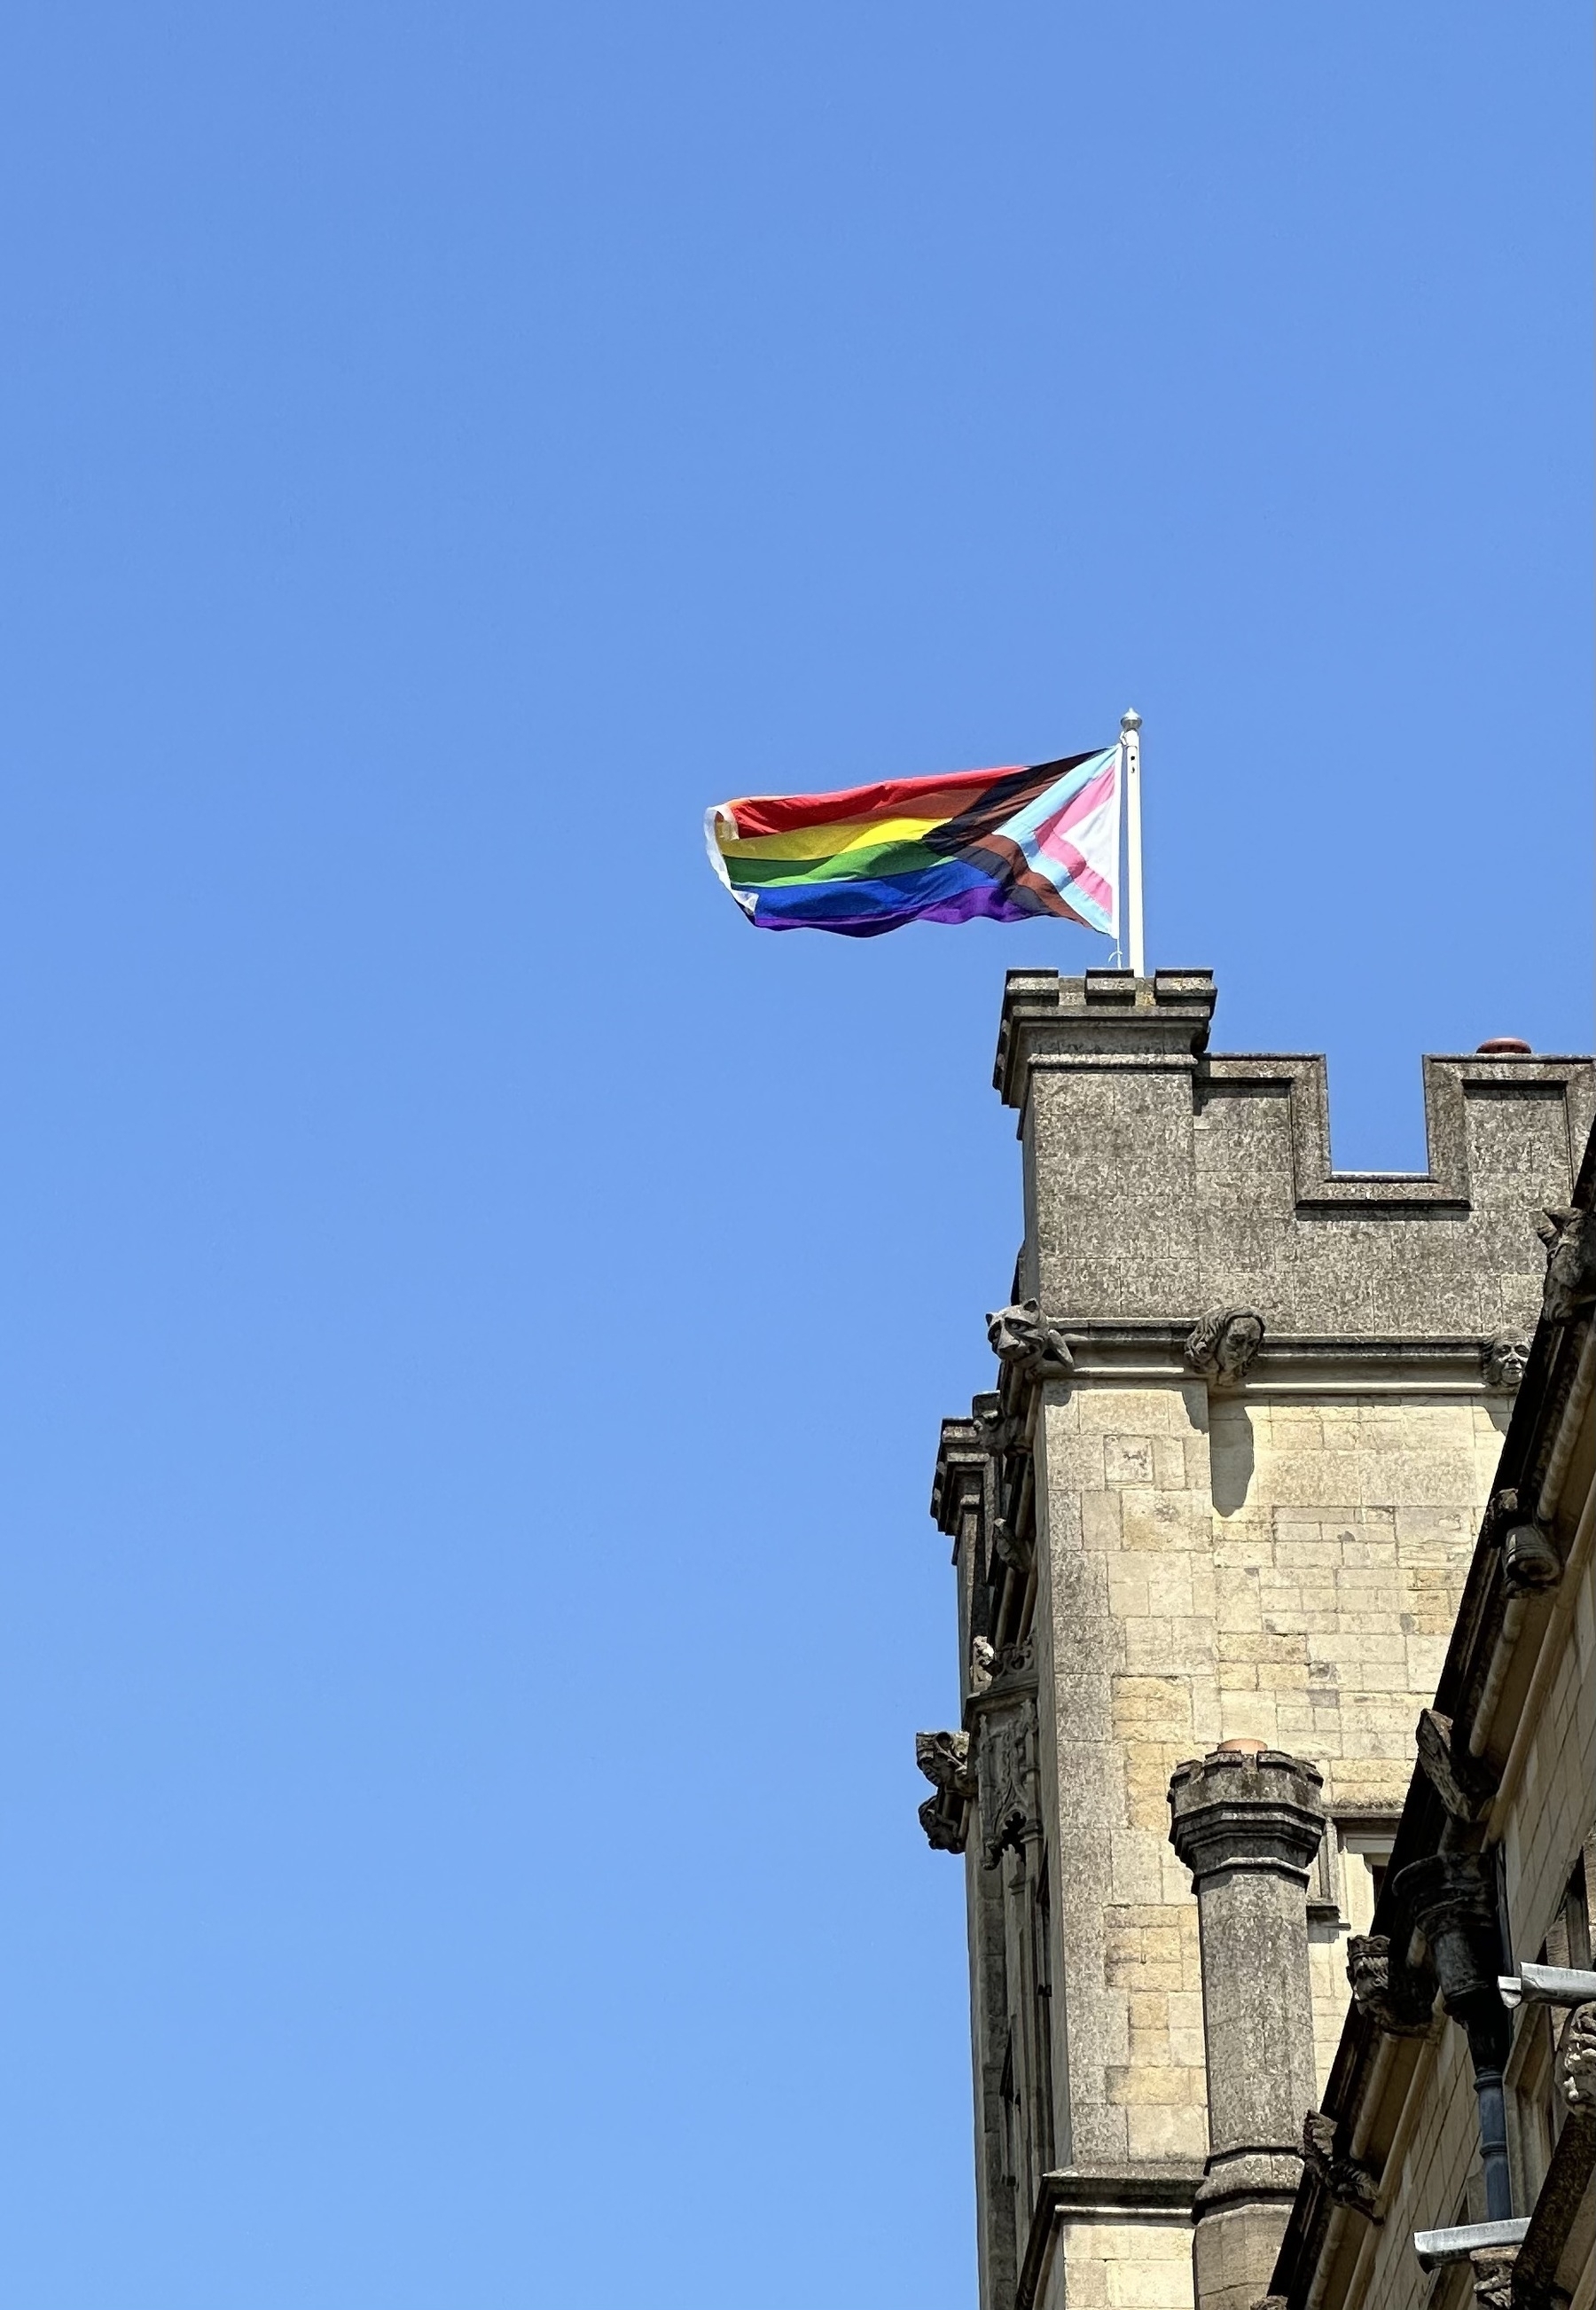 A progress pride flag flying from the top of a stone tower in Oxford, against a clear blue sky.